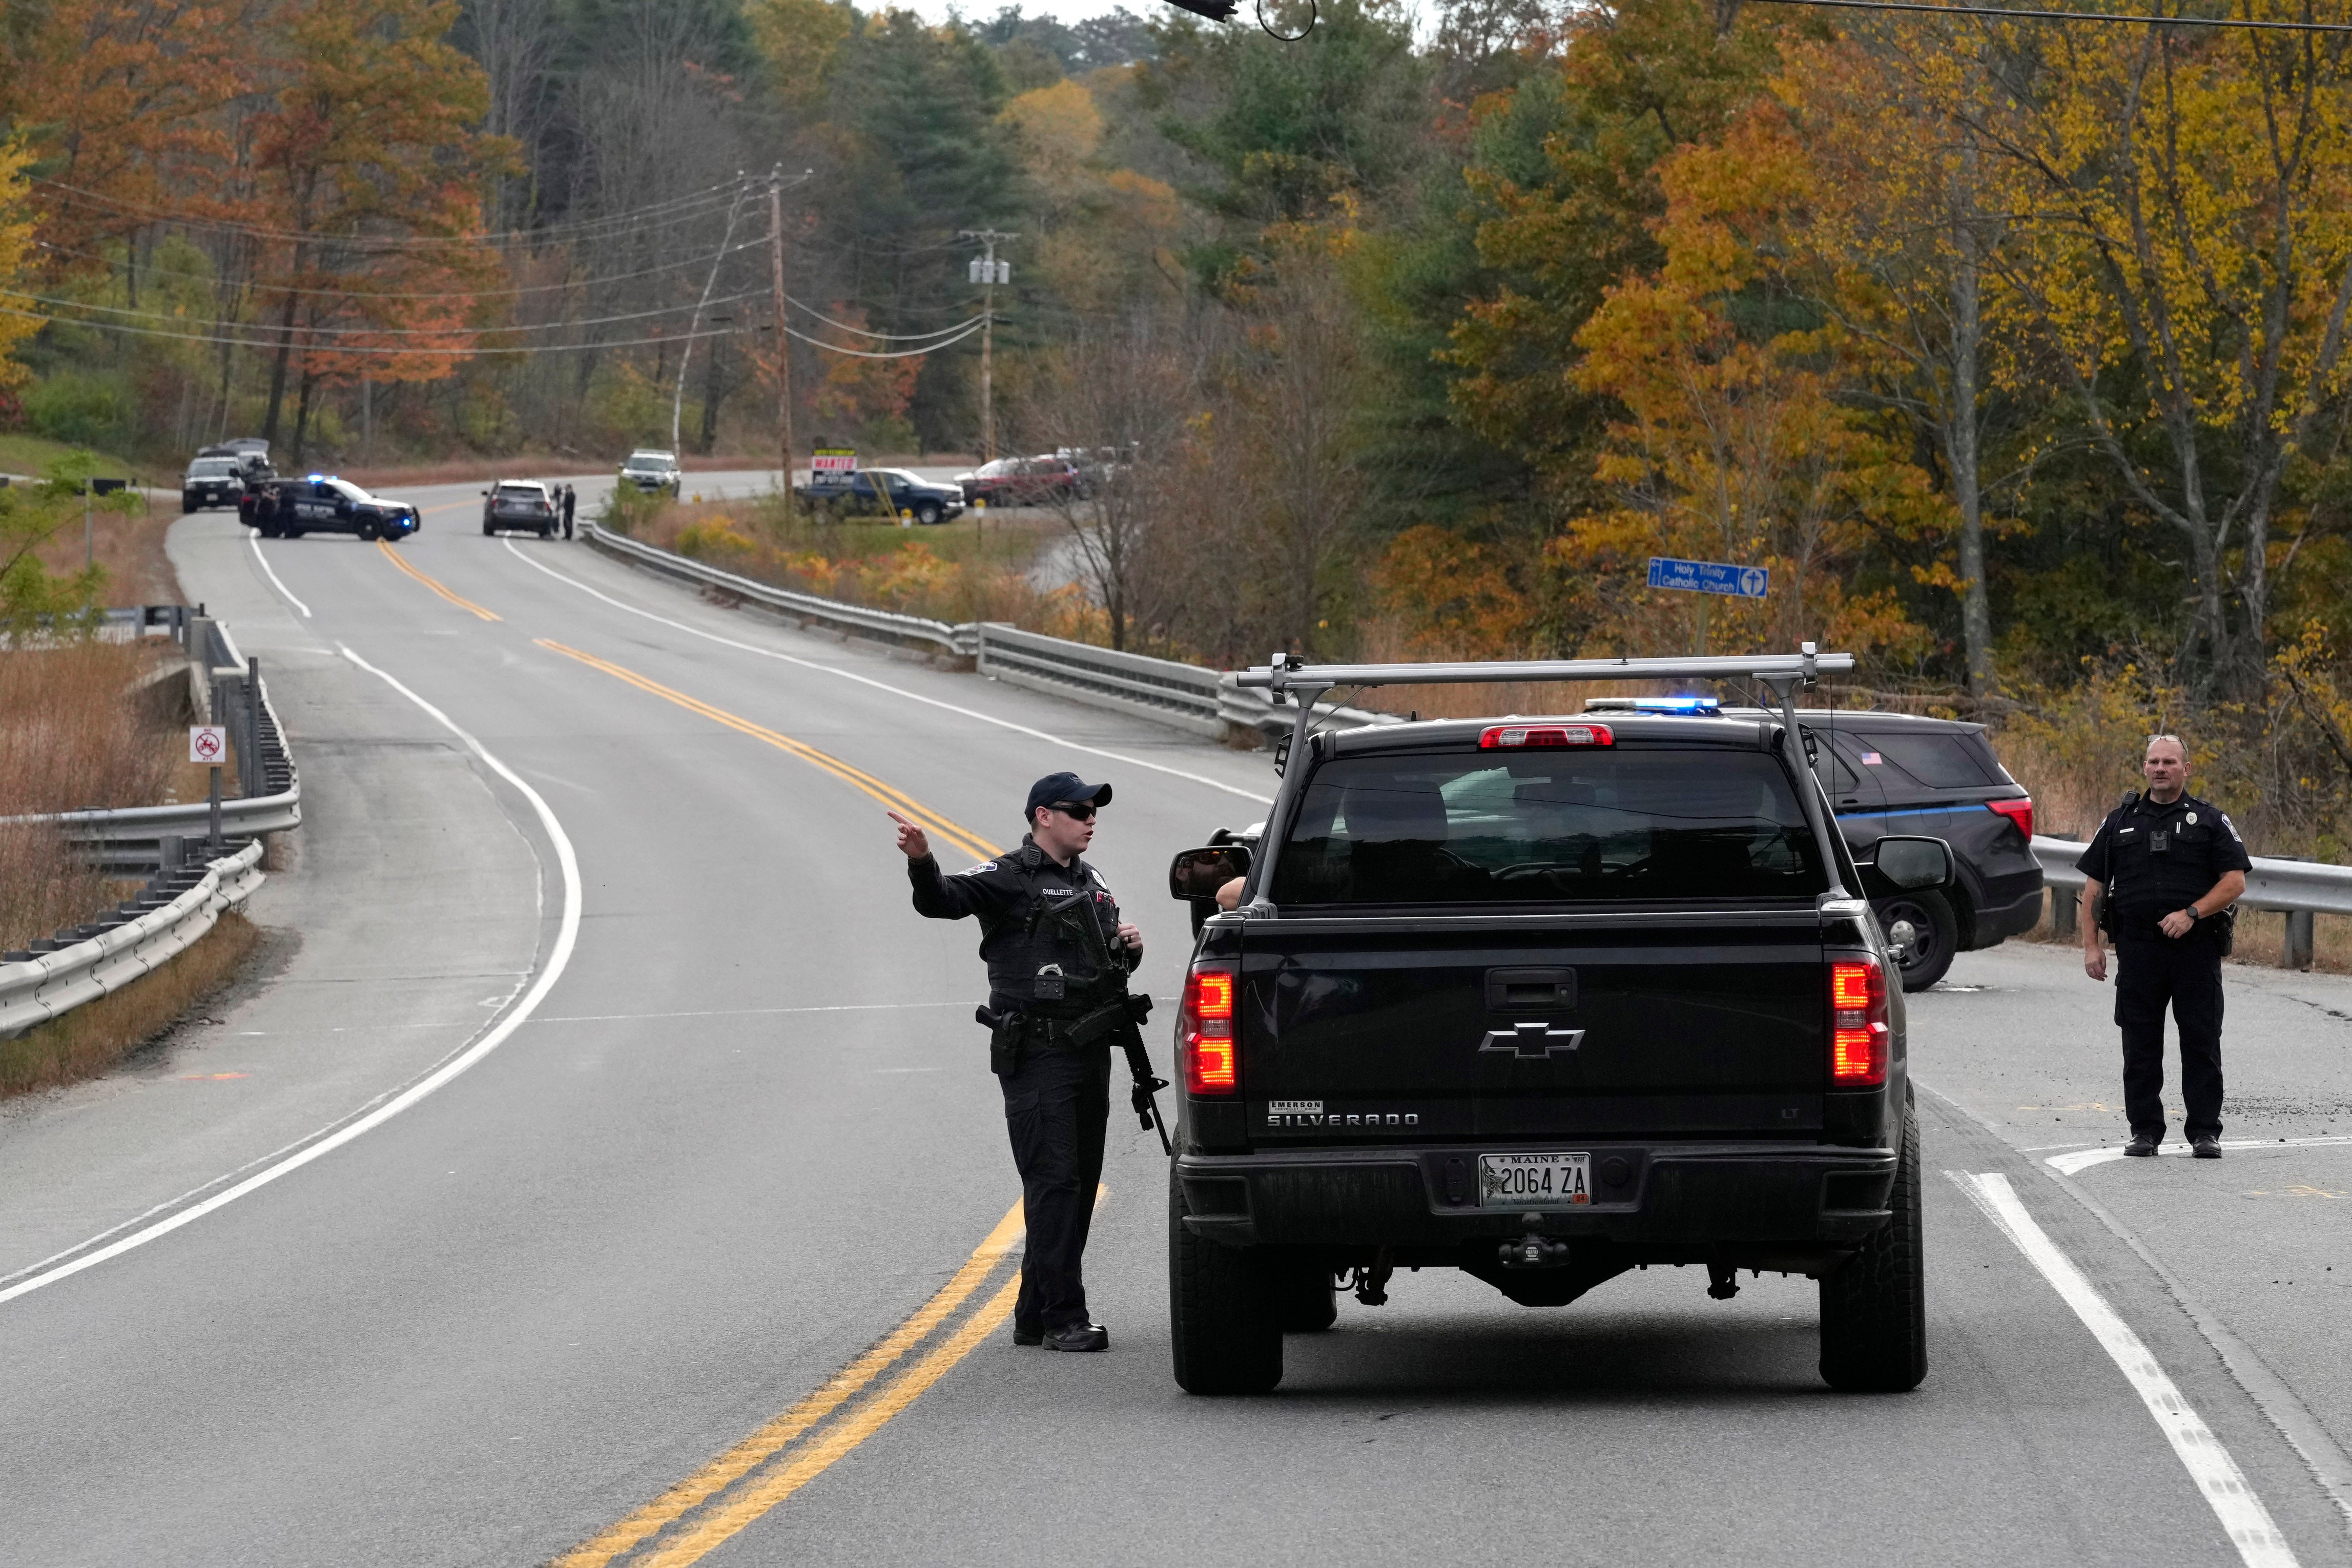 Police officers speak with a motorist at a roadblock in Lisbon, Maine